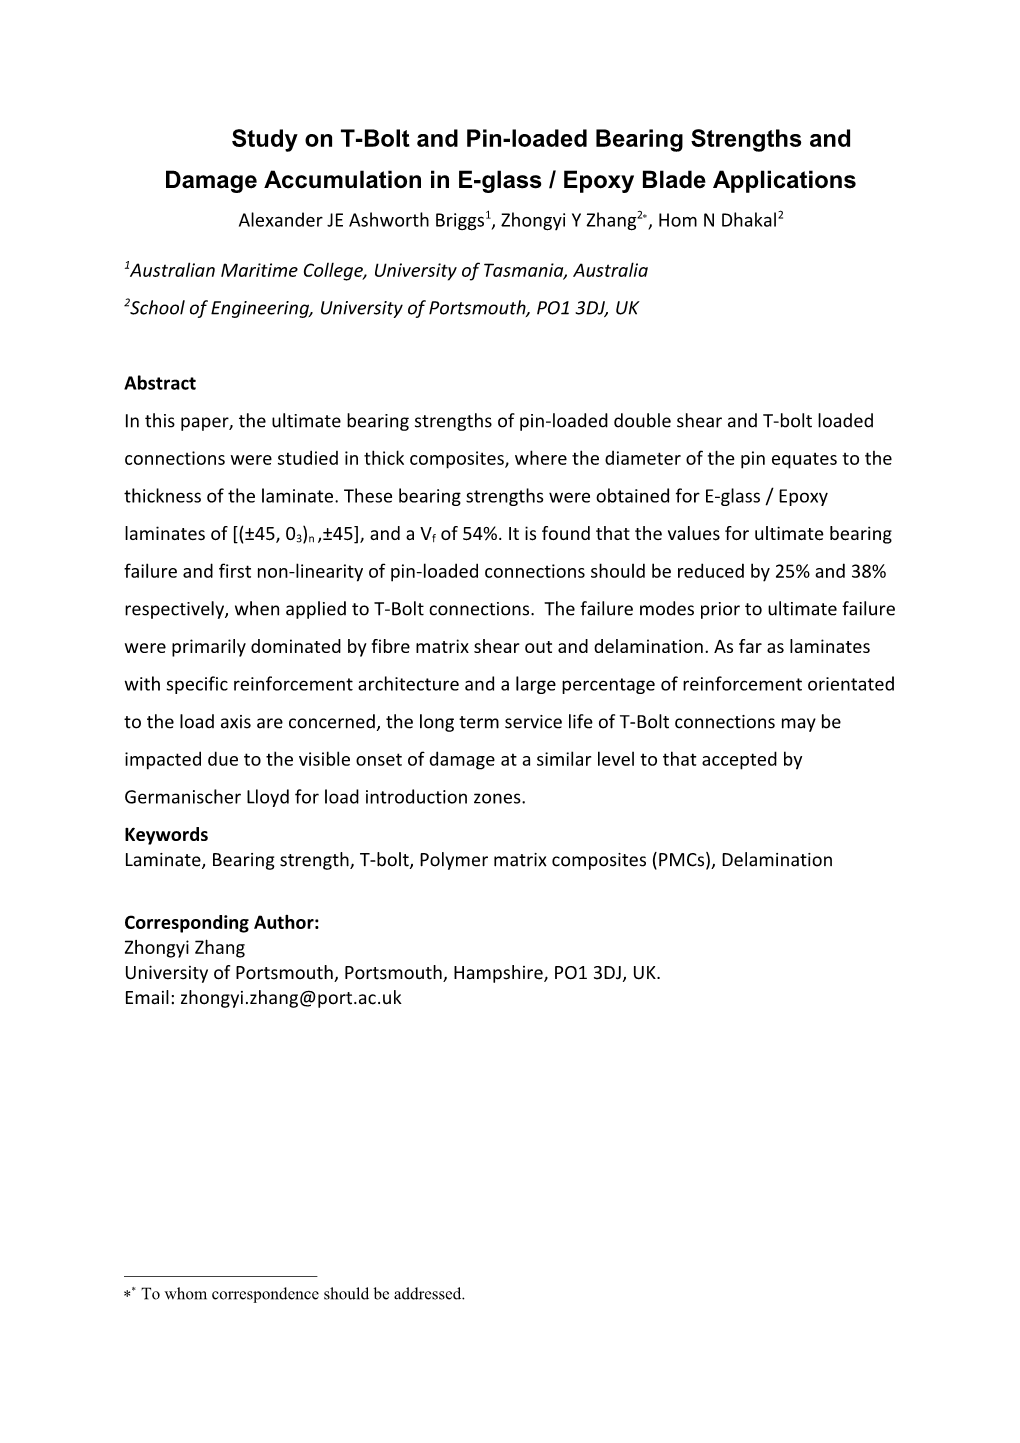 Study on T-Bolt and Pin-Loaded Bearing Strengths and Damage Accumulation in E-Glass